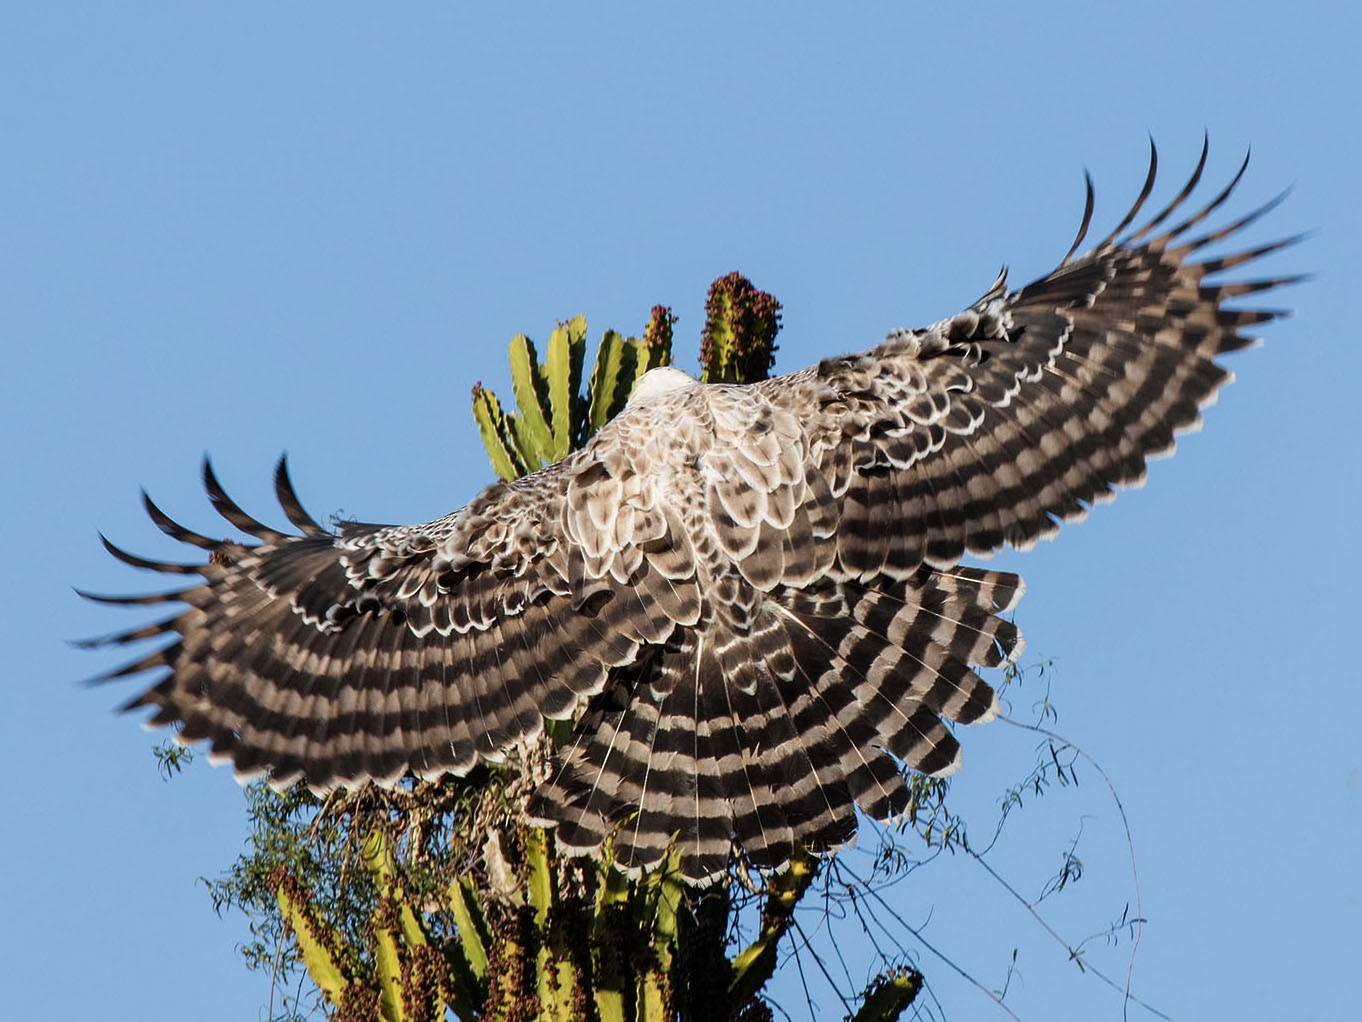 Crowned Eagle - Bruce Ward-Smith